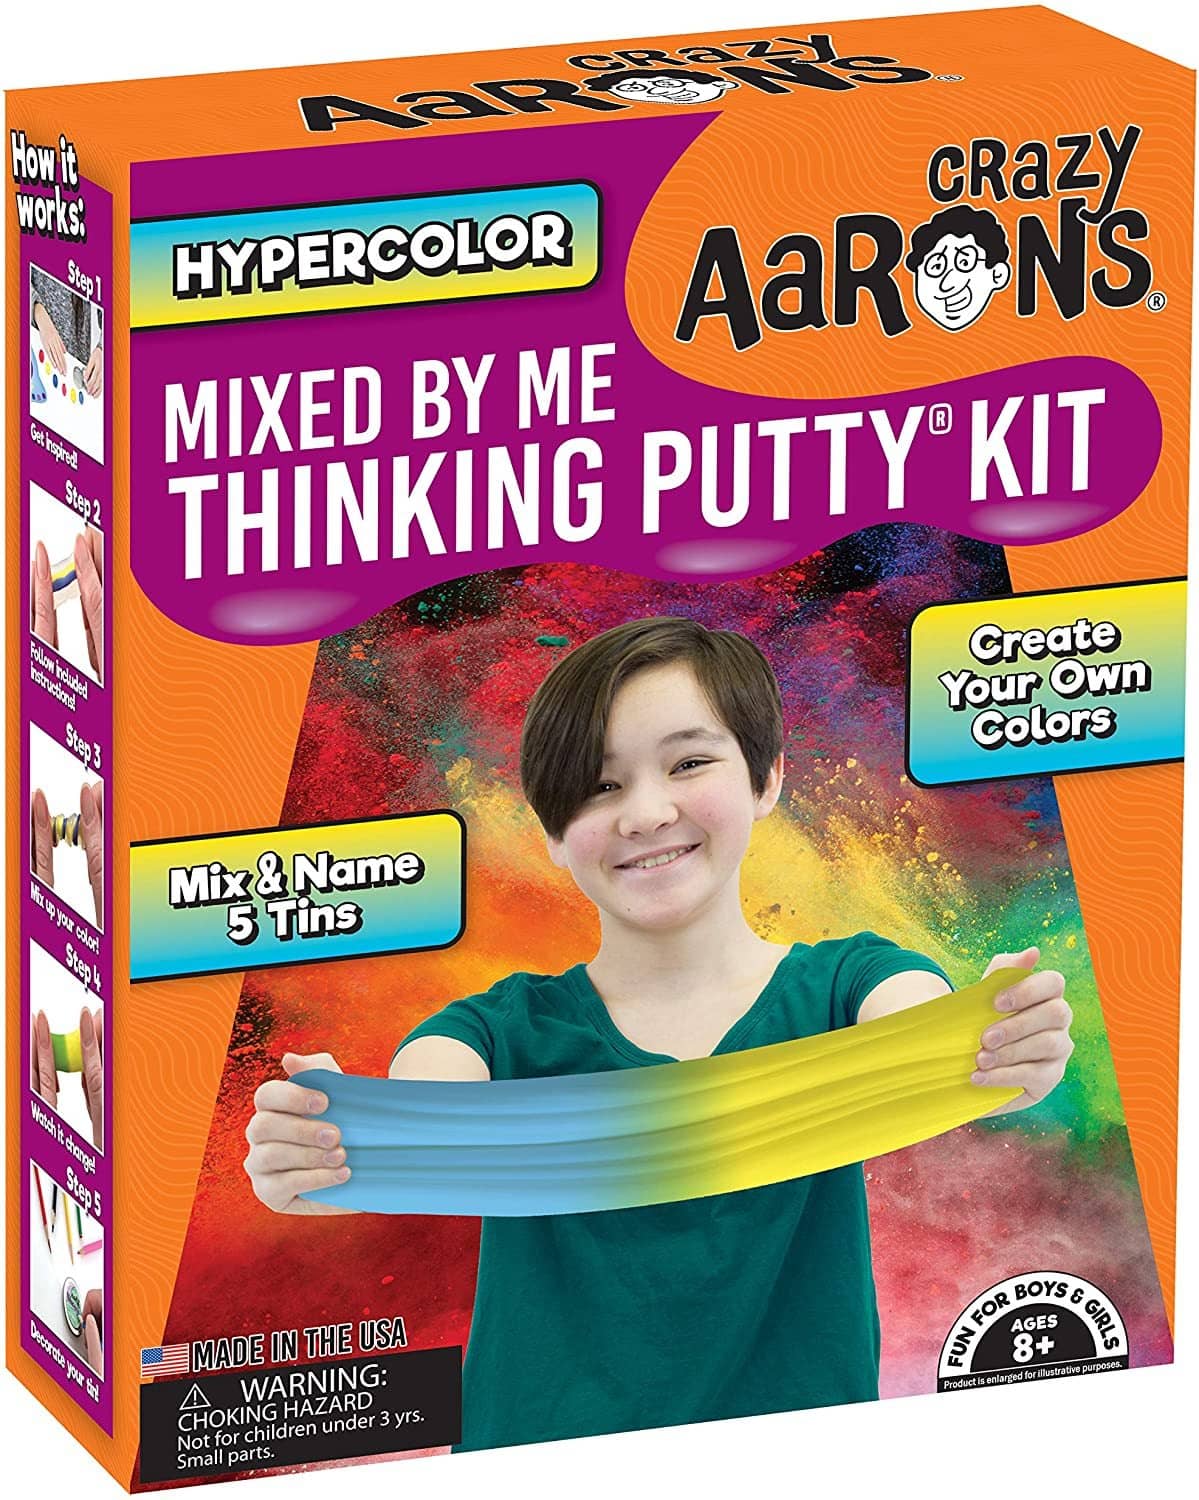 Hypercolor Mixed By Me Crazy Aarons Thinking Putty-Kidding Around NYC